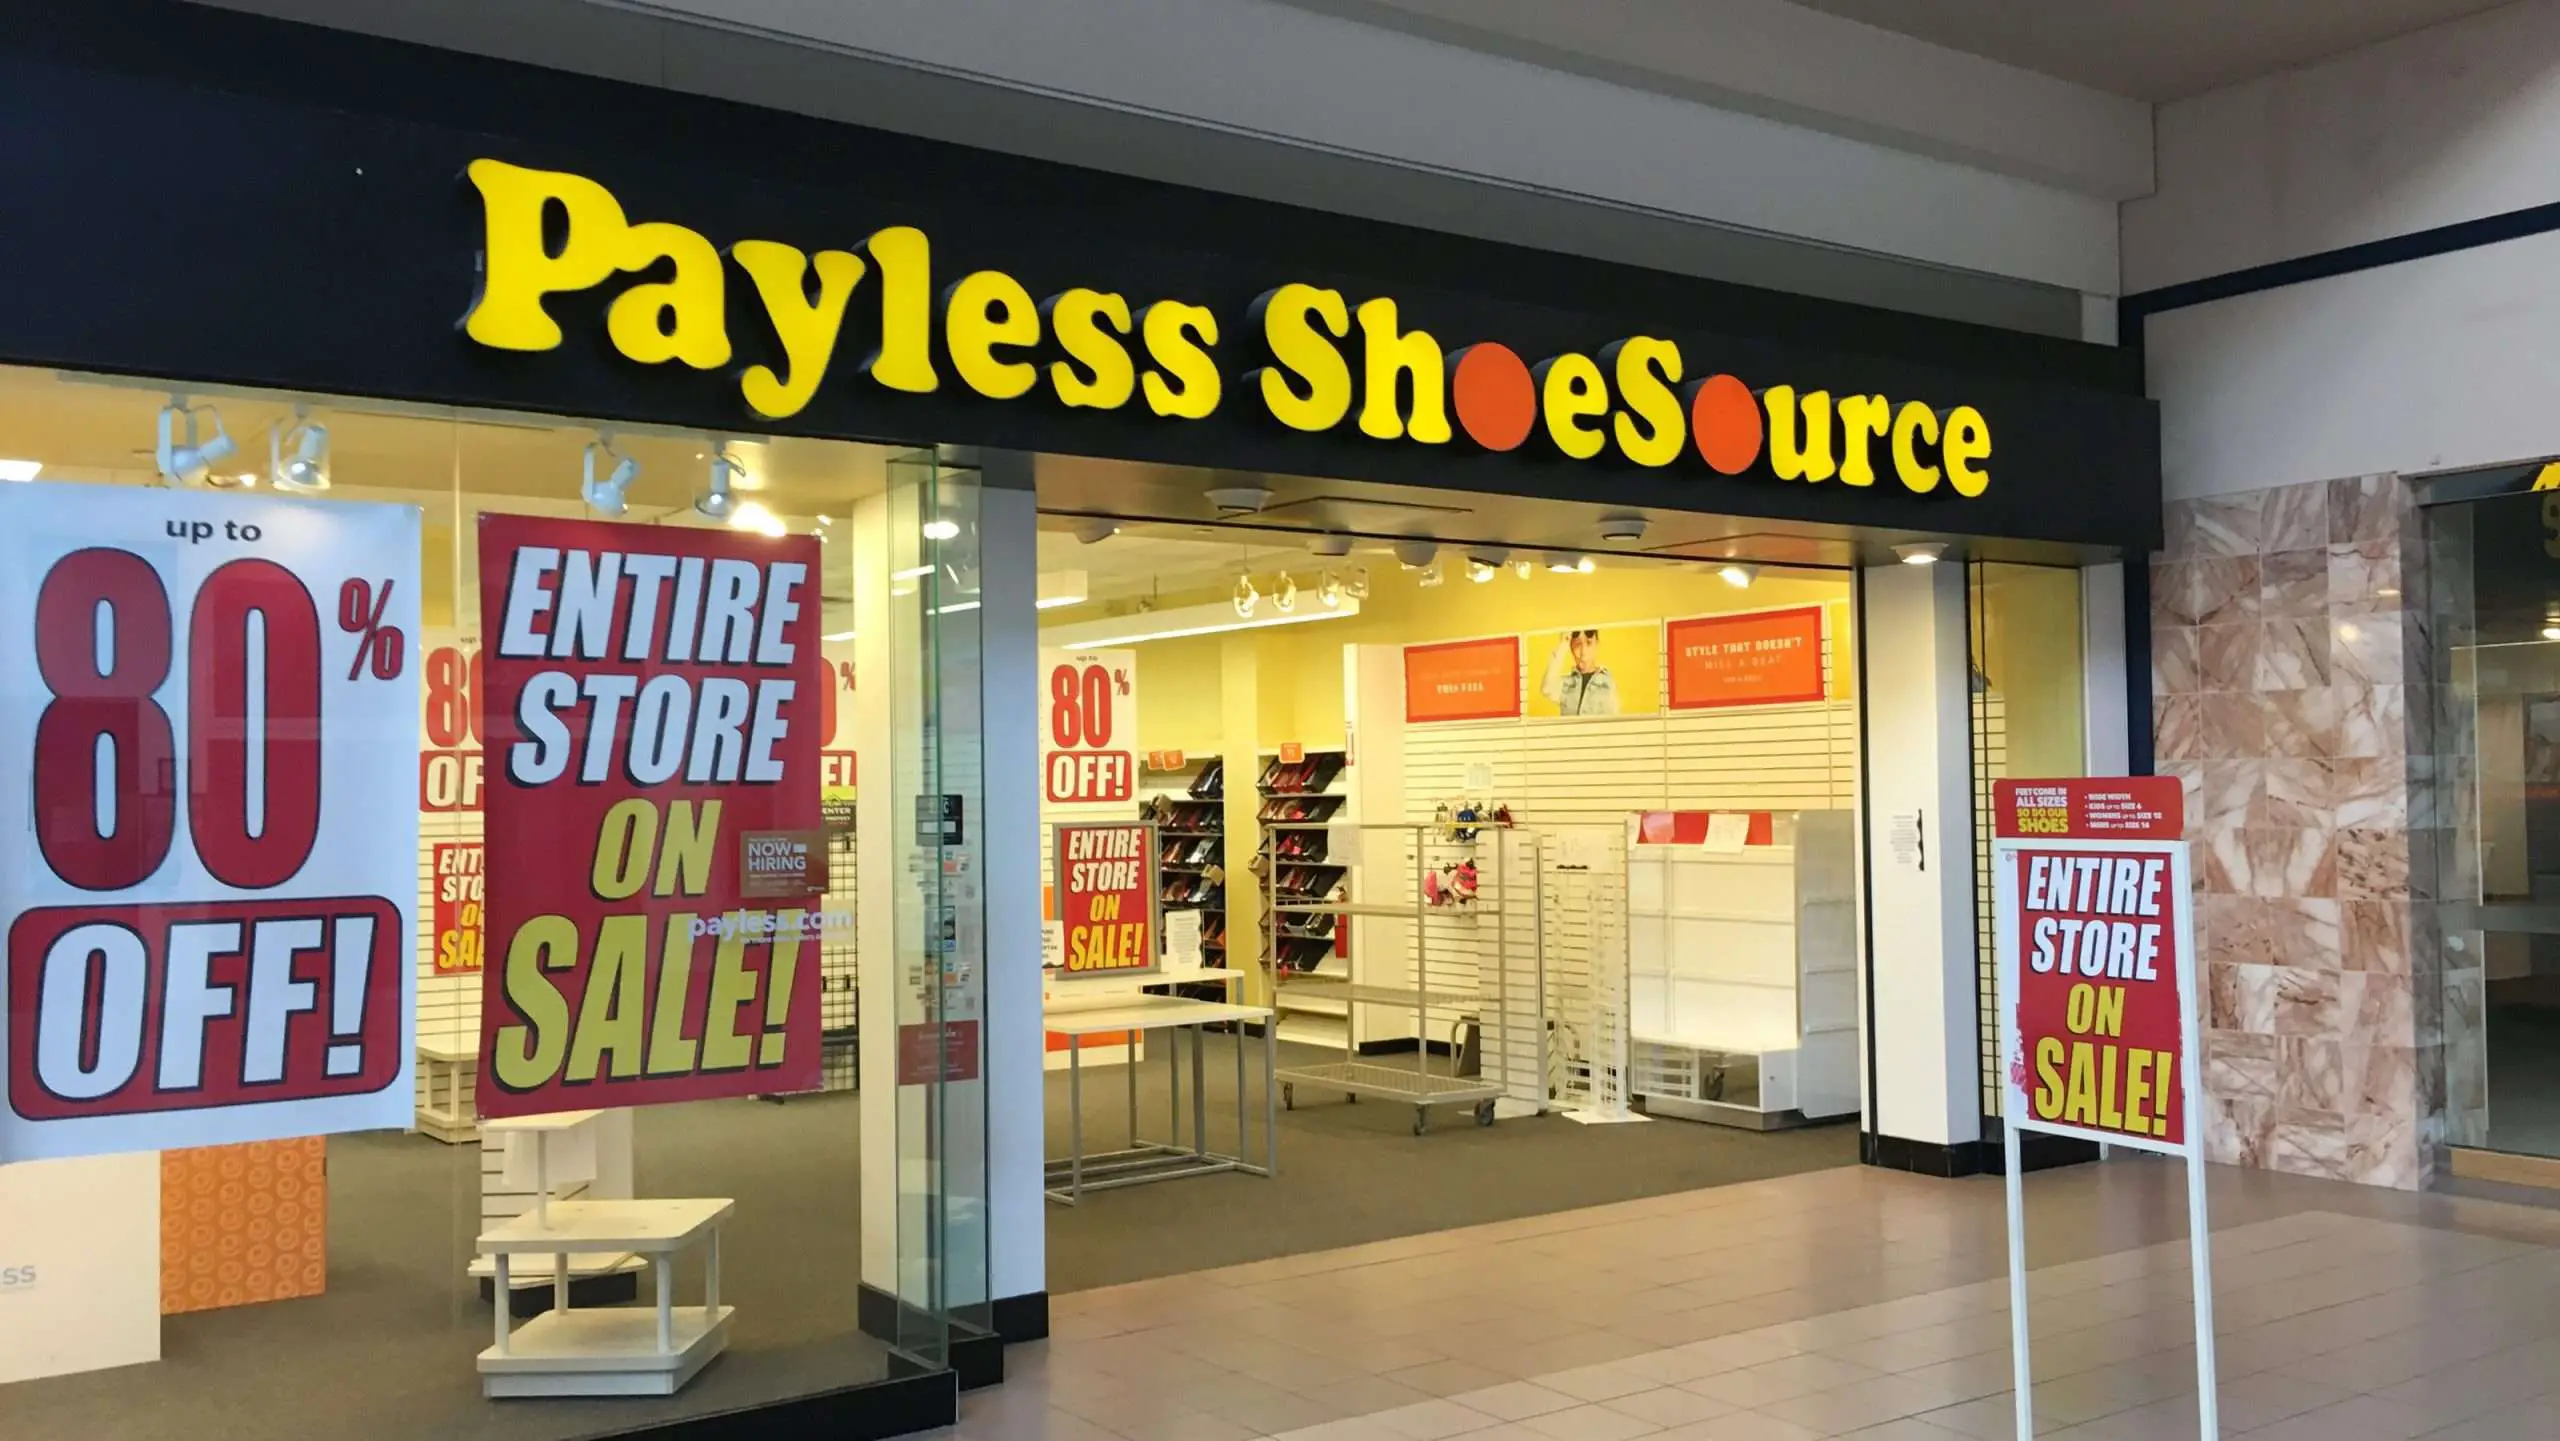 Payless ShoeSource: All U.S. stores liquidating and closing